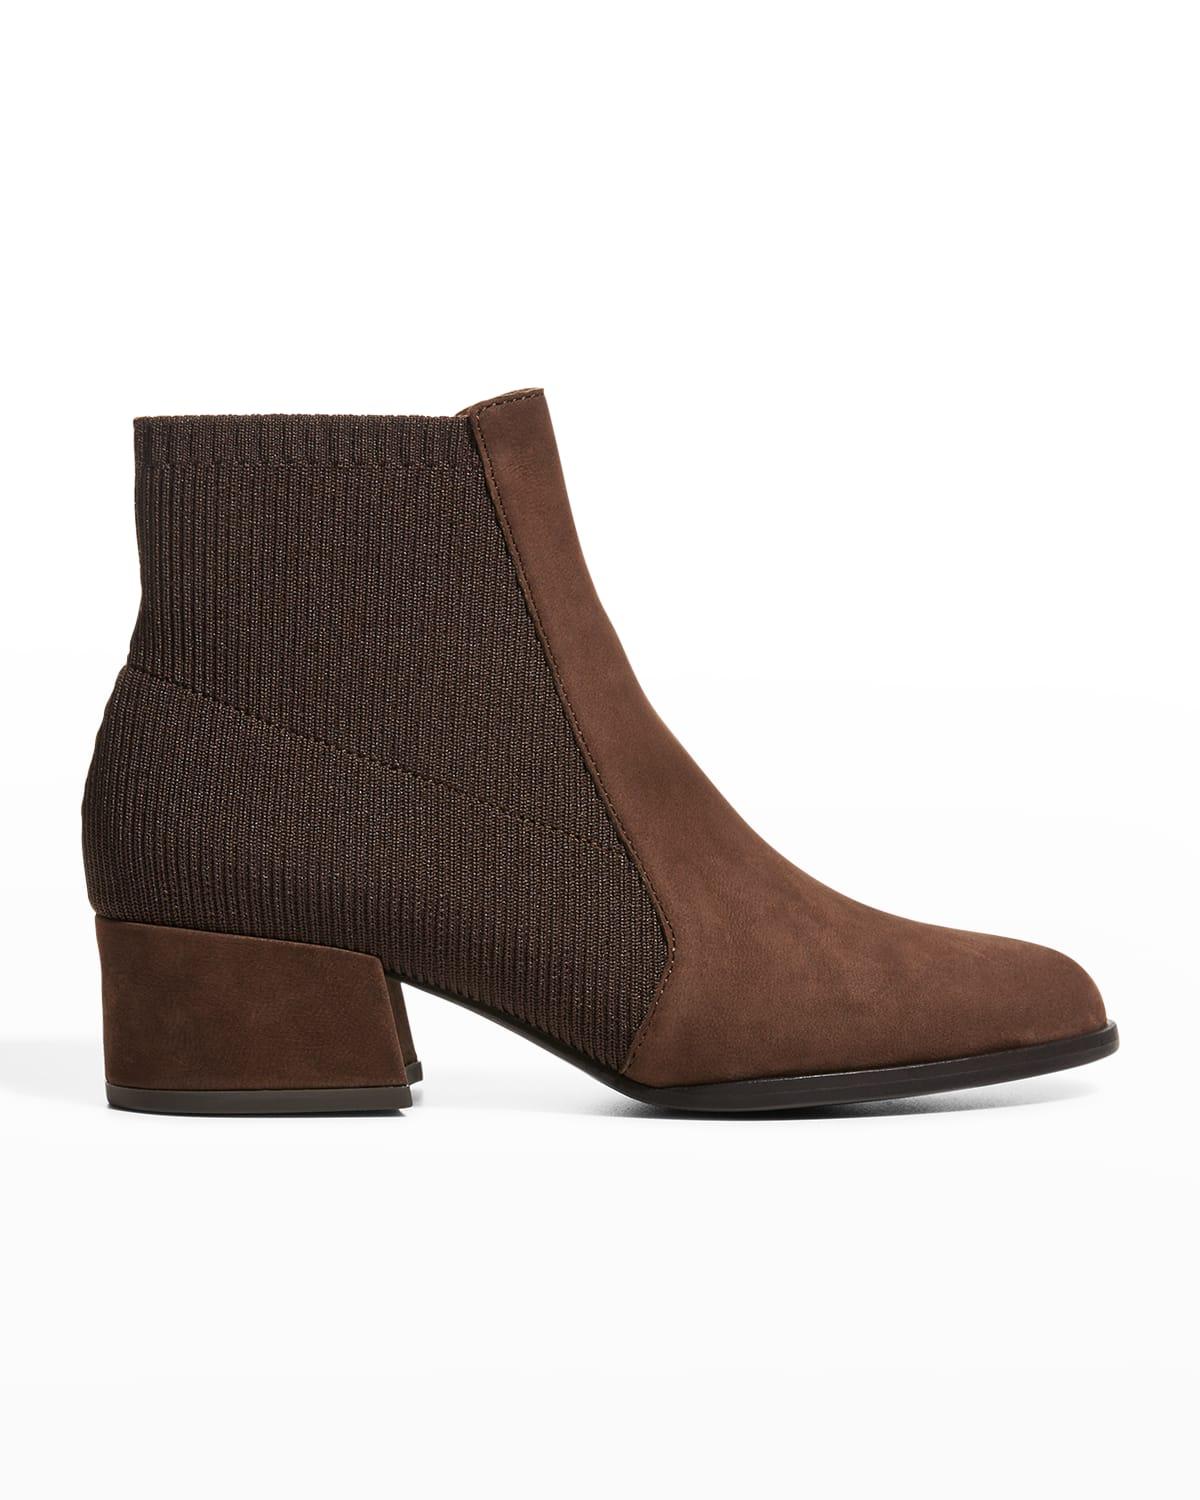 Eileen Fisher Aesop Suede Pull-on Ankle Booties in Brown | Lyst